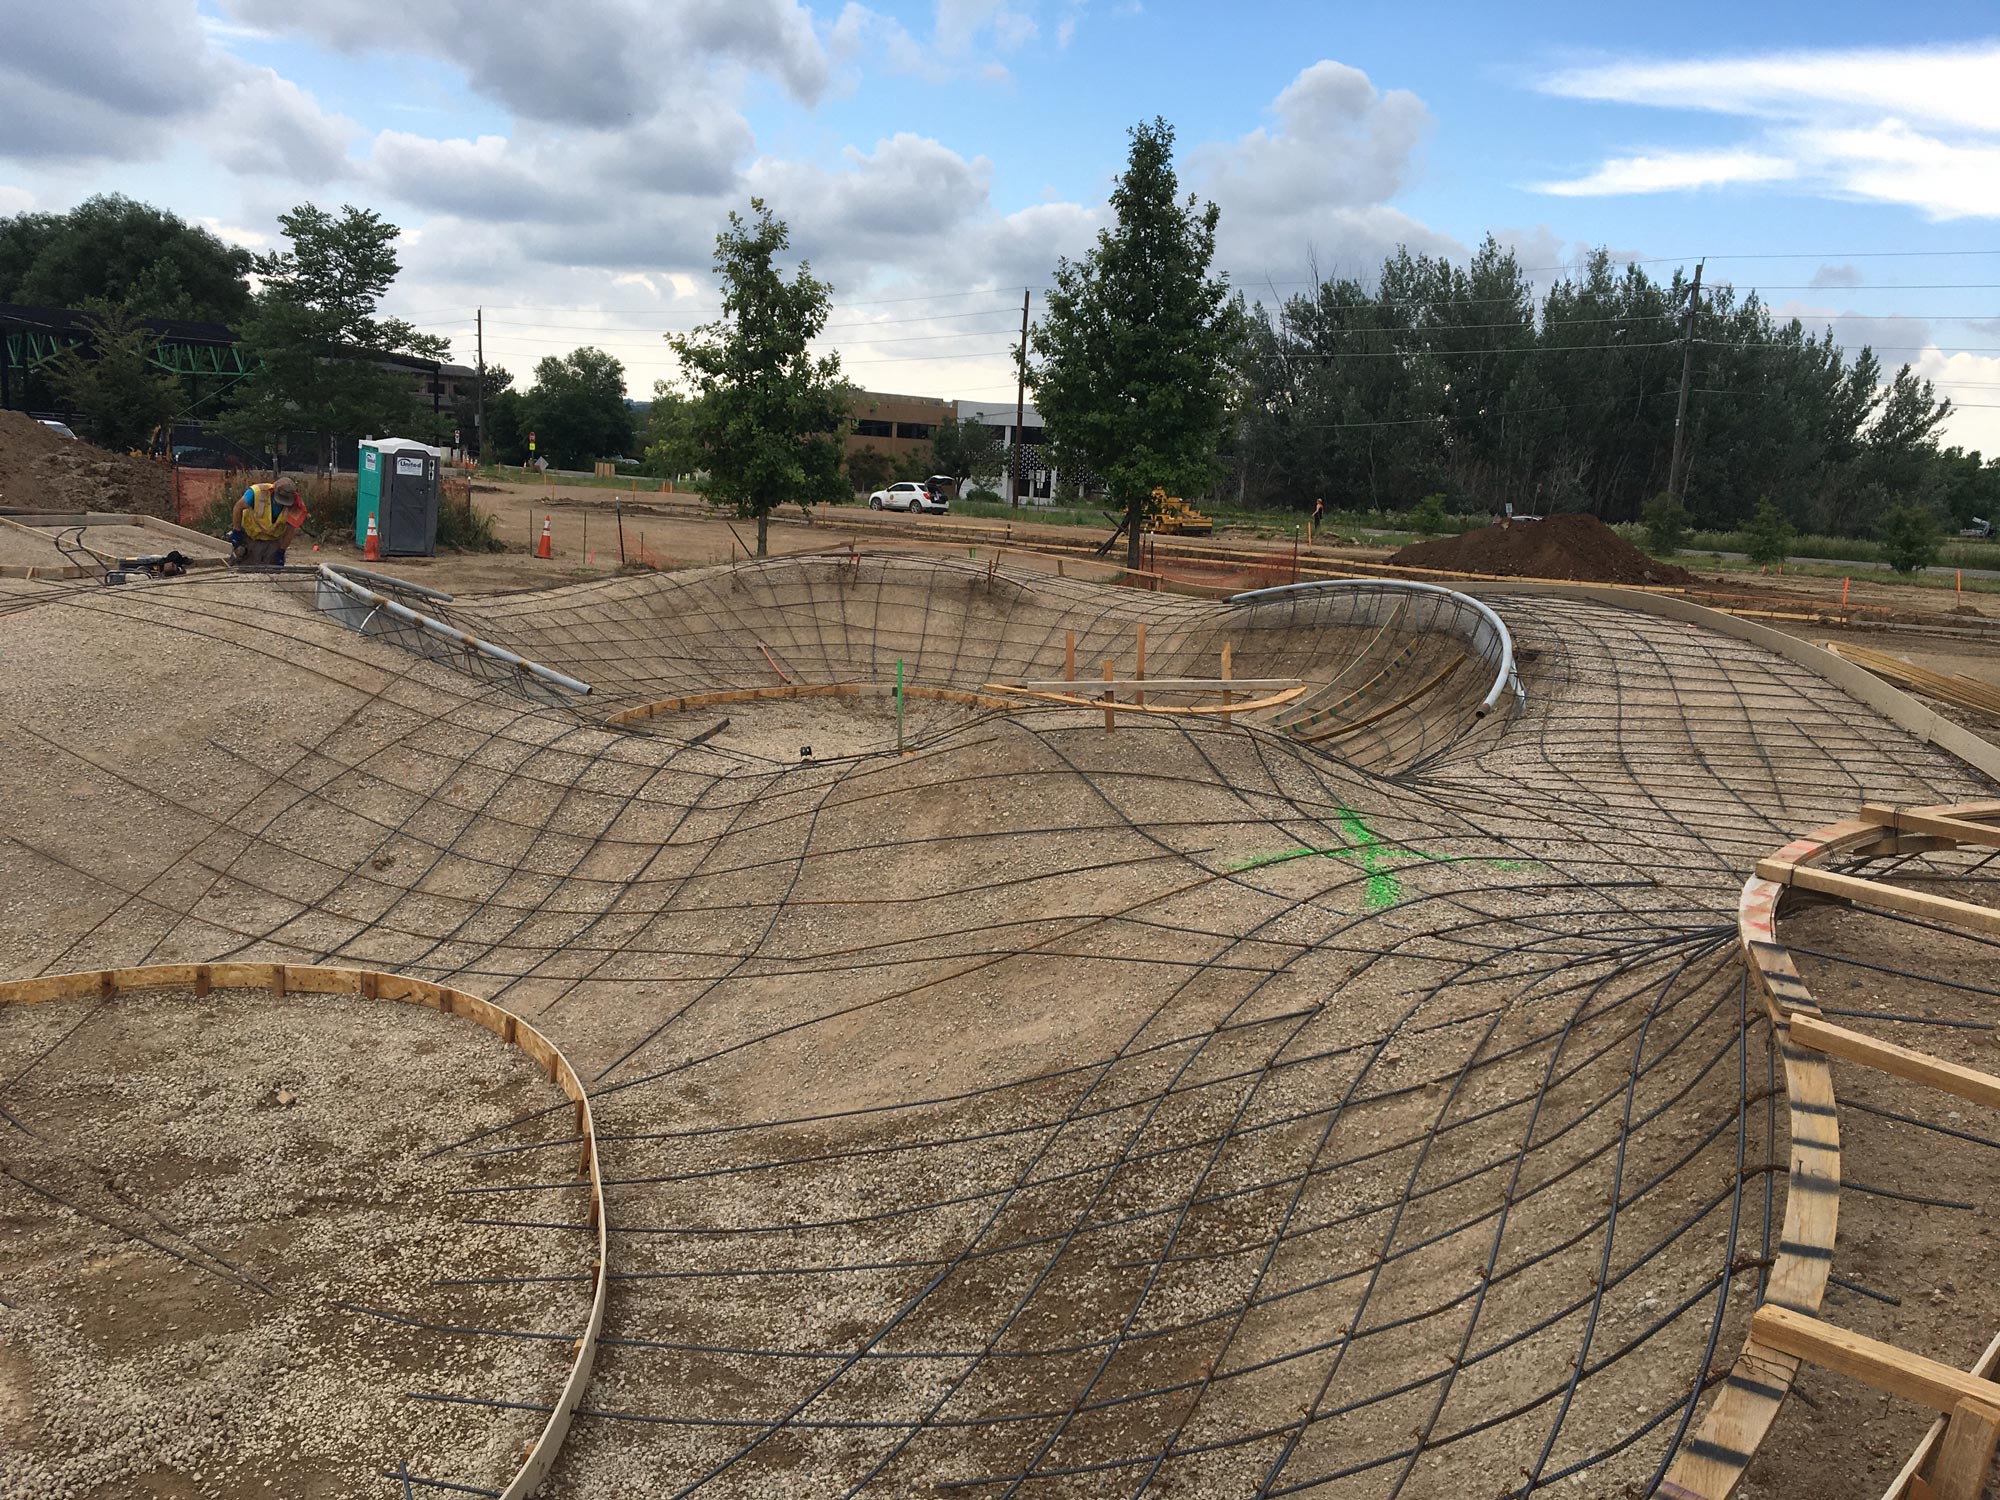 Wires crisscross over molded dirt, where concrete will soon be poured for the skate area at Valmont City Park.